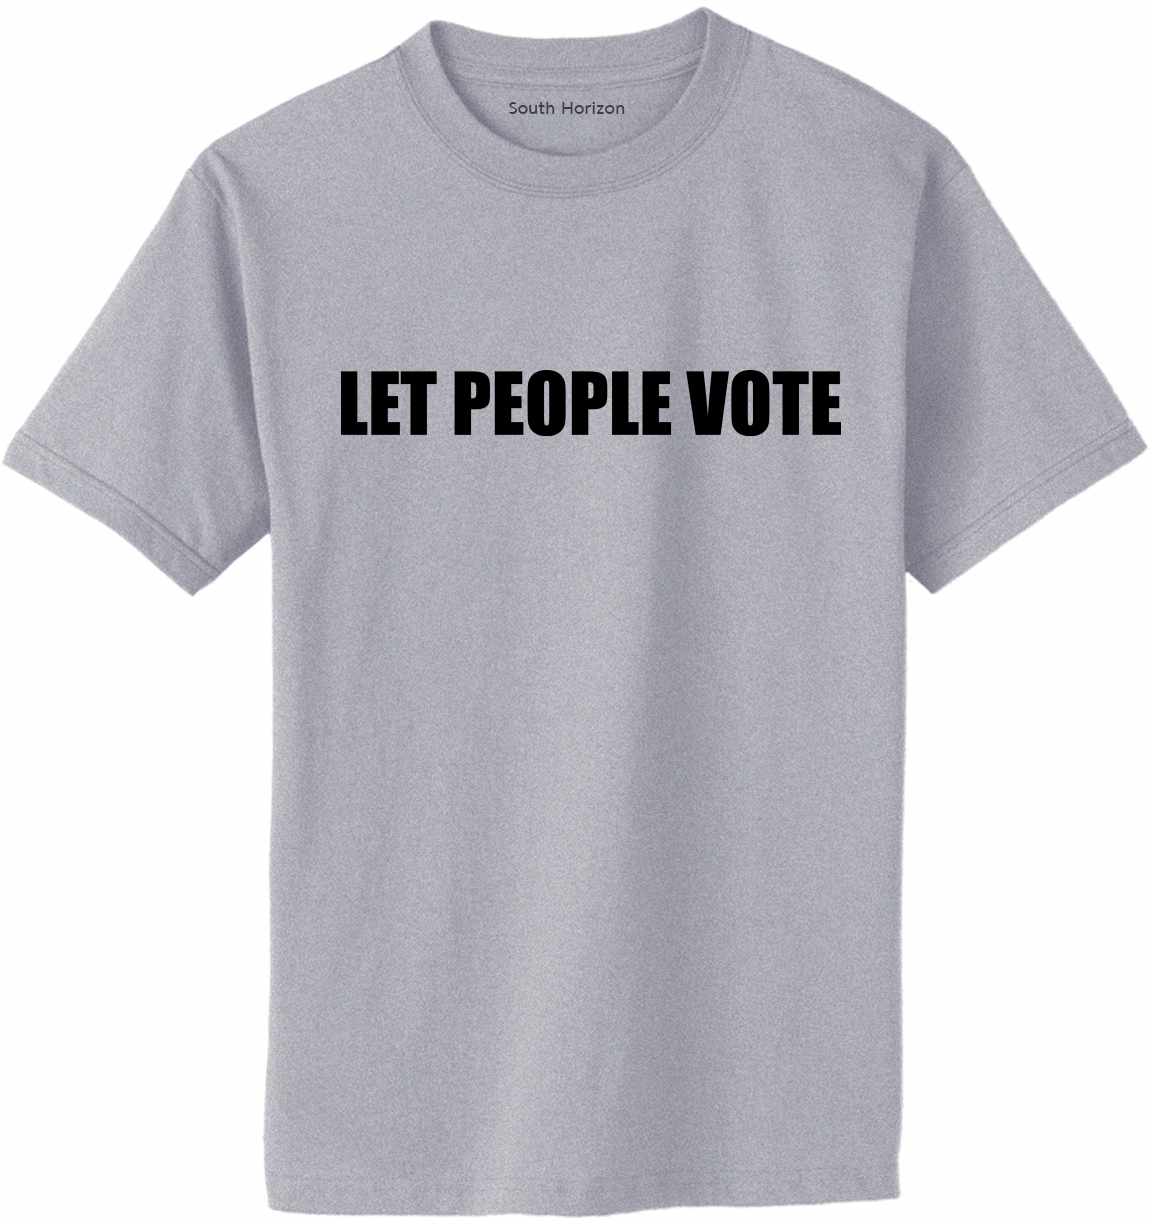 Let People Vote on Adult T-Shirt (#1216-1)